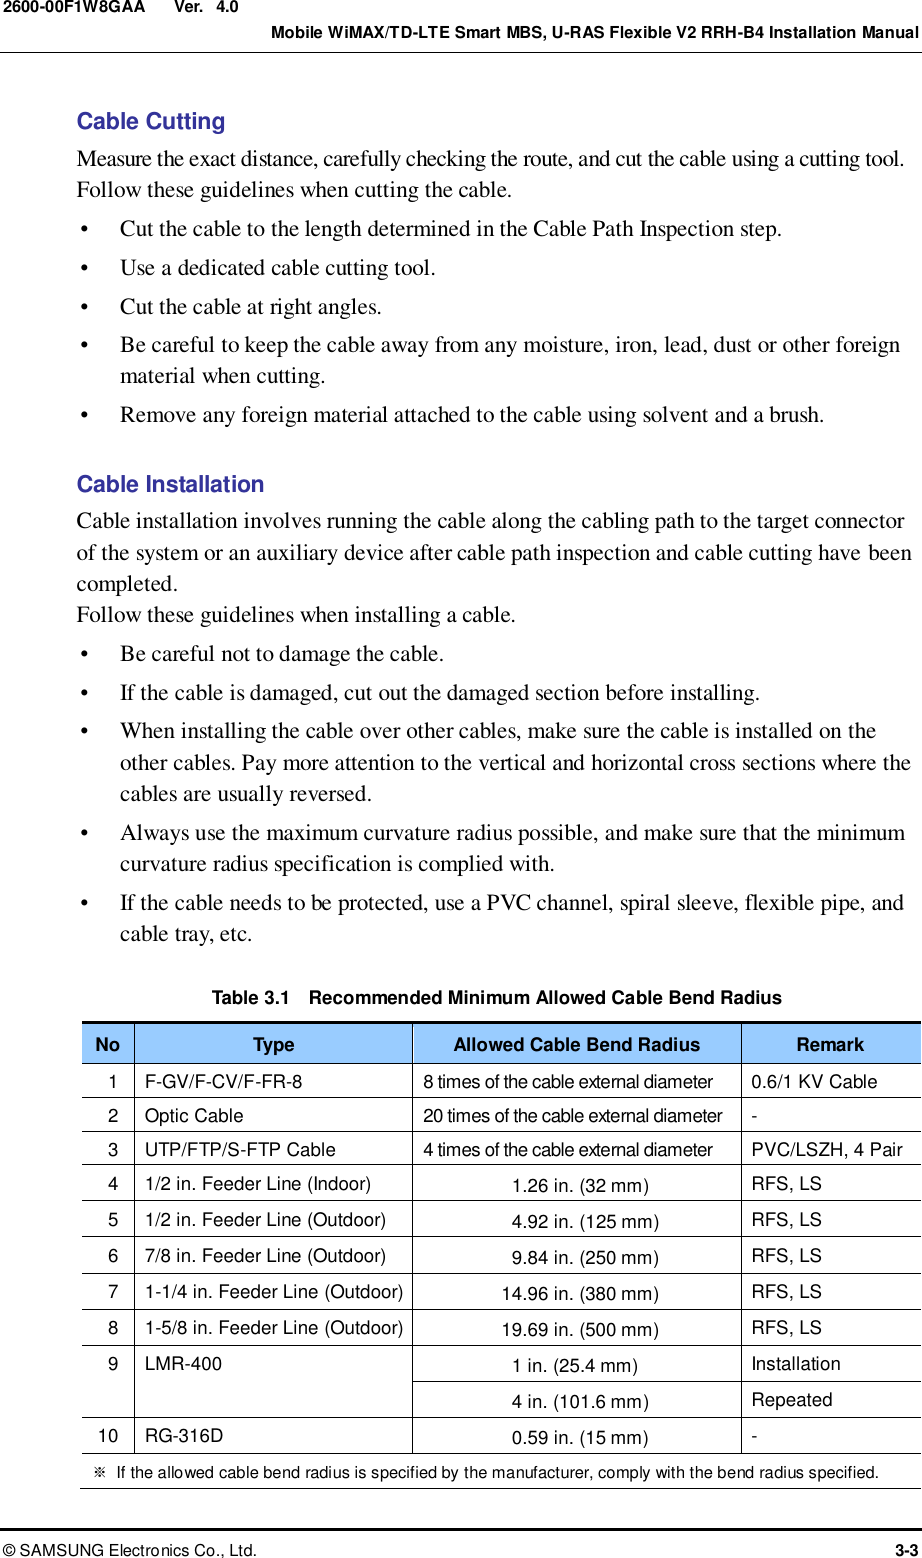  Ver.    Mobile WiMAX/TD-LTE Smart MBS, U-RAS Flexible V2 RRH-B4 Installation Manual ©  SAMSUNG Electronics Co., Ltd.  3-3 2600-00F1W8GAA 4.0 Cable Cutting Measure the exact distance, carefully checking the route, and cut the cable using a cutting tool. Follow these guidelines when cutting the cable.  Cut the cable to the length determined in the Cable Path Inspection step.  Use a dedicated cable cutting tool.  Cut the cable at right angles.  Be careful to keep the cable away from any moisture, iron, lead, dust or other foreign material when cutting.    Remove any foreign material attached to the cable using solvent and a brush.  Cable Installation Cable installation involves running the cable along the cabling path to the target connector of the system or an auxiliary device after cable path inspection and cable cutting have been completed. Follow these guidelines when installing a cable.    Be careful not to damage the cable.  If the cable is damaged, cut out the damaged section before installing.  When installing the cable over other cables, make sure the cable is installed on the other cables. Pay more attention to the vertical and horizontal cross sections where the cables are usually reversed.  Always use the maximum curvature radius possible, and make sure that the minimum curvature radius specification is complied with.  If the cable needs to be protected, use a PVC channel, spiral sleeve, flexible pipe, and cable tray, etc.  Table 3.1    Recommended Minimum Allowed Cable Bend Radius No Type Allowed Cable Bend Radius Remark 1 F-GV/F-CV/F-FR-8 8 times of the cable external diameter 0.6/1 KV Cable 2 Optic Cable 20 times of the cable external diameter - 3 UTP/FTP/S-FTP Cable 4 times of the cable external diameter PVC/LSZH, 4 Pair 4 1/2 in. Feeder Line (Indoor) 1.26 in. (32 mm) RFS, LS 5 1/2 in. Feeder Line (Outdoor) 4.92 in. (125 mm) RFS, LS 6 7/8 in. Feeder Line (Outdoor) 9.84 in. (250 mm) RFS, LS 7 1-1/4 in. Feeder Line (Outdoor) 14.96 in. (380 mm) RFS, LS 8 1-5/8 in. Feeder Line (Outdoor) 19.69 in. (500 mm) RFS, LS 9 LMR-400 1 in. (25.4 mm) Installation 4 in. (101.6 mm) Repeated 10 RG-316D 0.59 in. (15 mm) - ※  If the allowed cable bend radius is specified by the manufacturer, comply with the bend radius specified. 